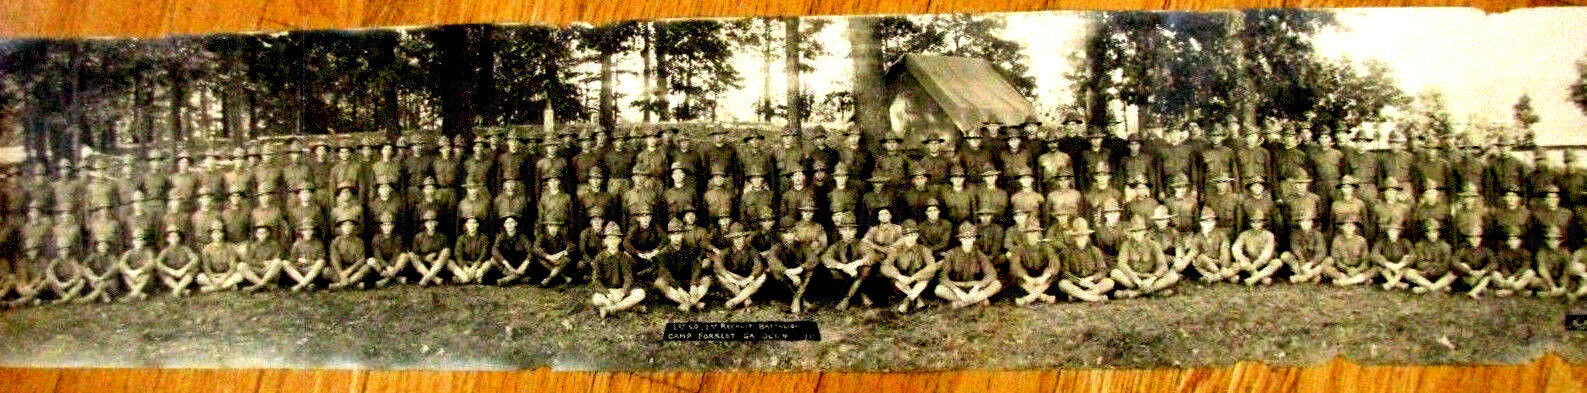 WWI PHOTO YOUNGSTOWN PENNSYLVANIA SOLDIERS CAMP FORREST CHATTANOOGA TENNESSEE